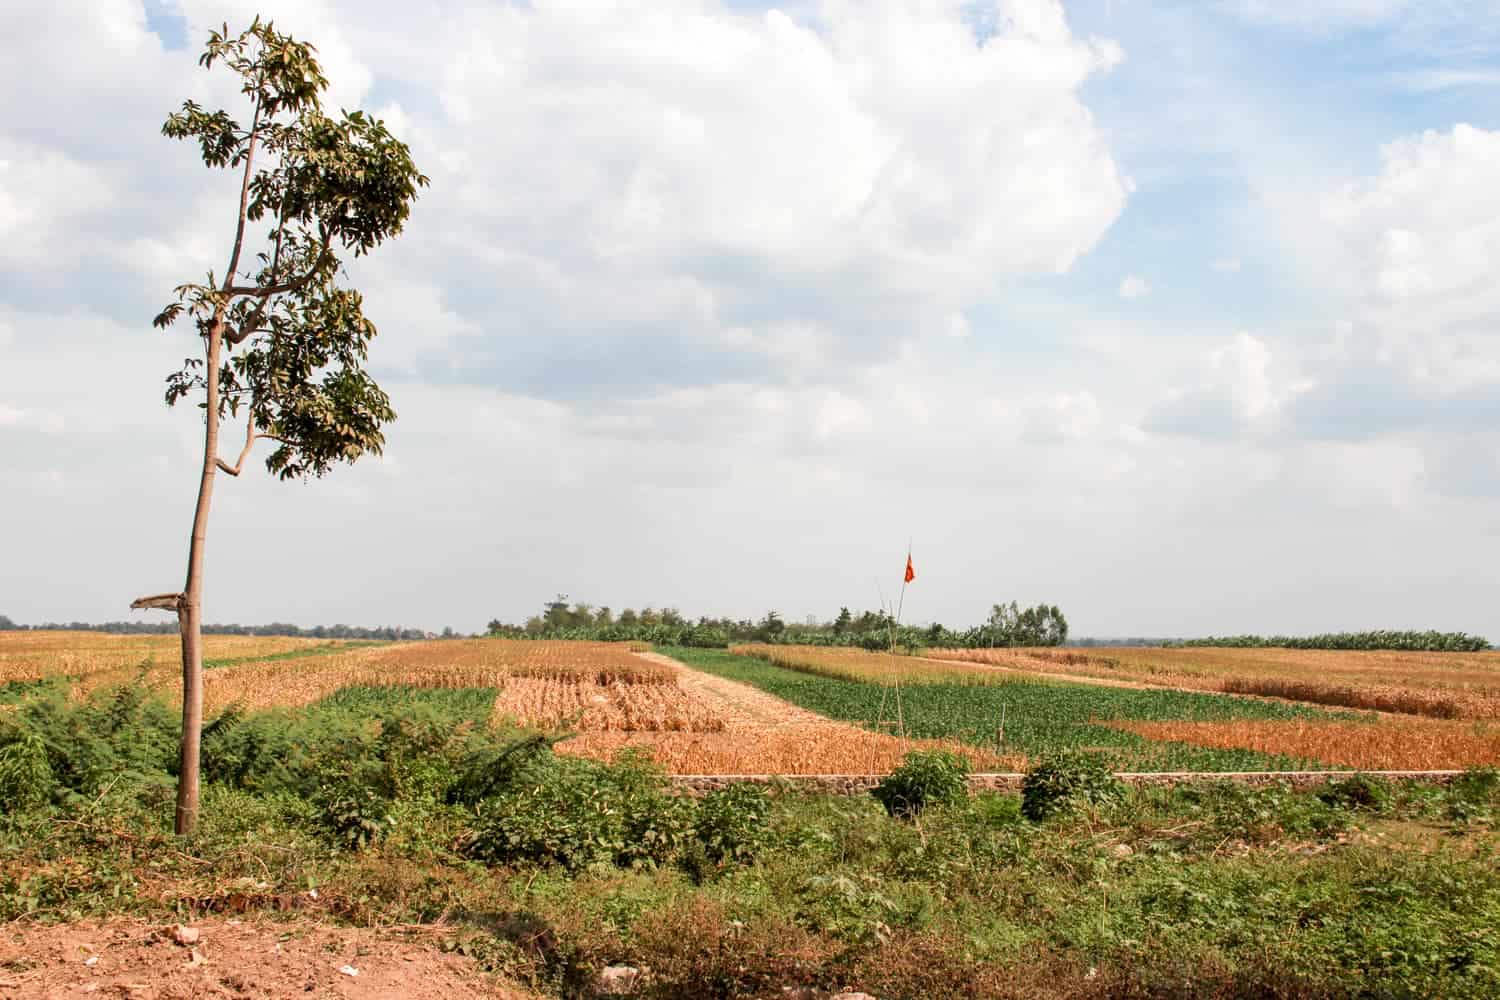 Island fields at the bamboo bridge crossing in Kampong Cham, Cambodia